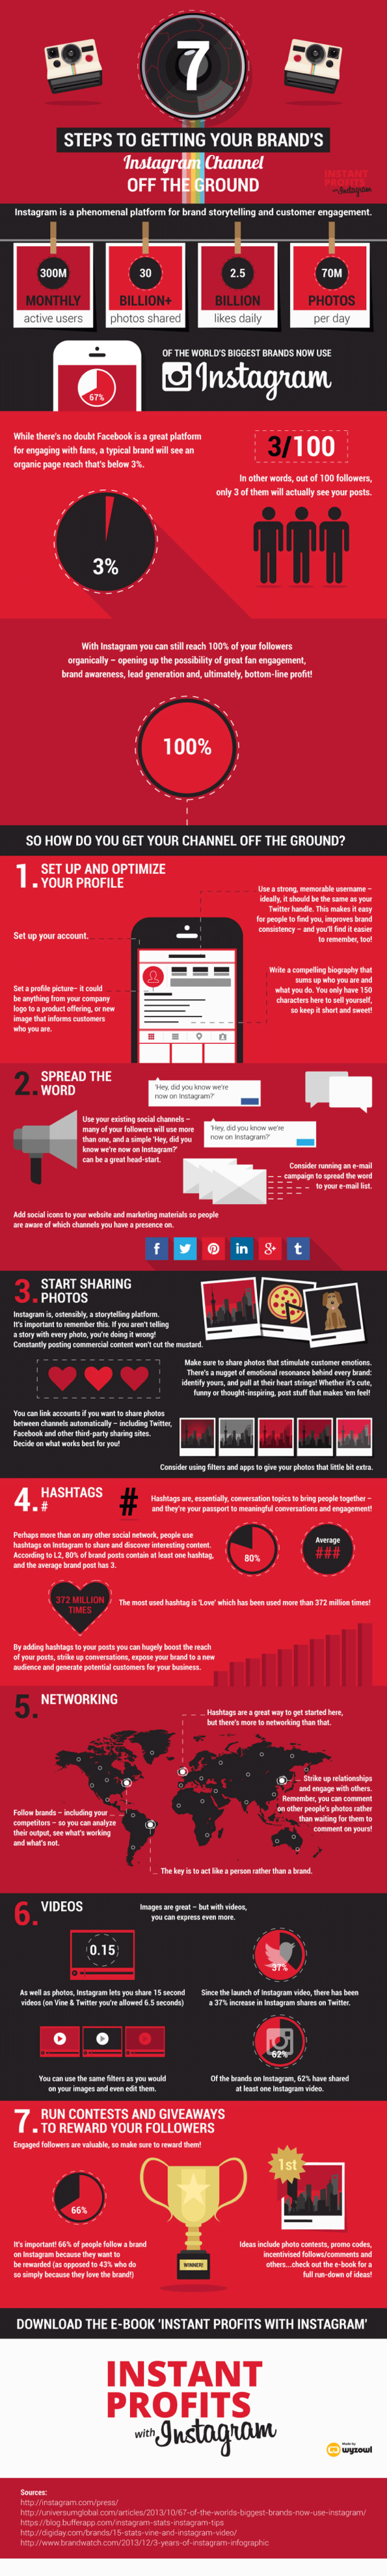 Instagram for Business: How to Get Your Brand Started Infographic image